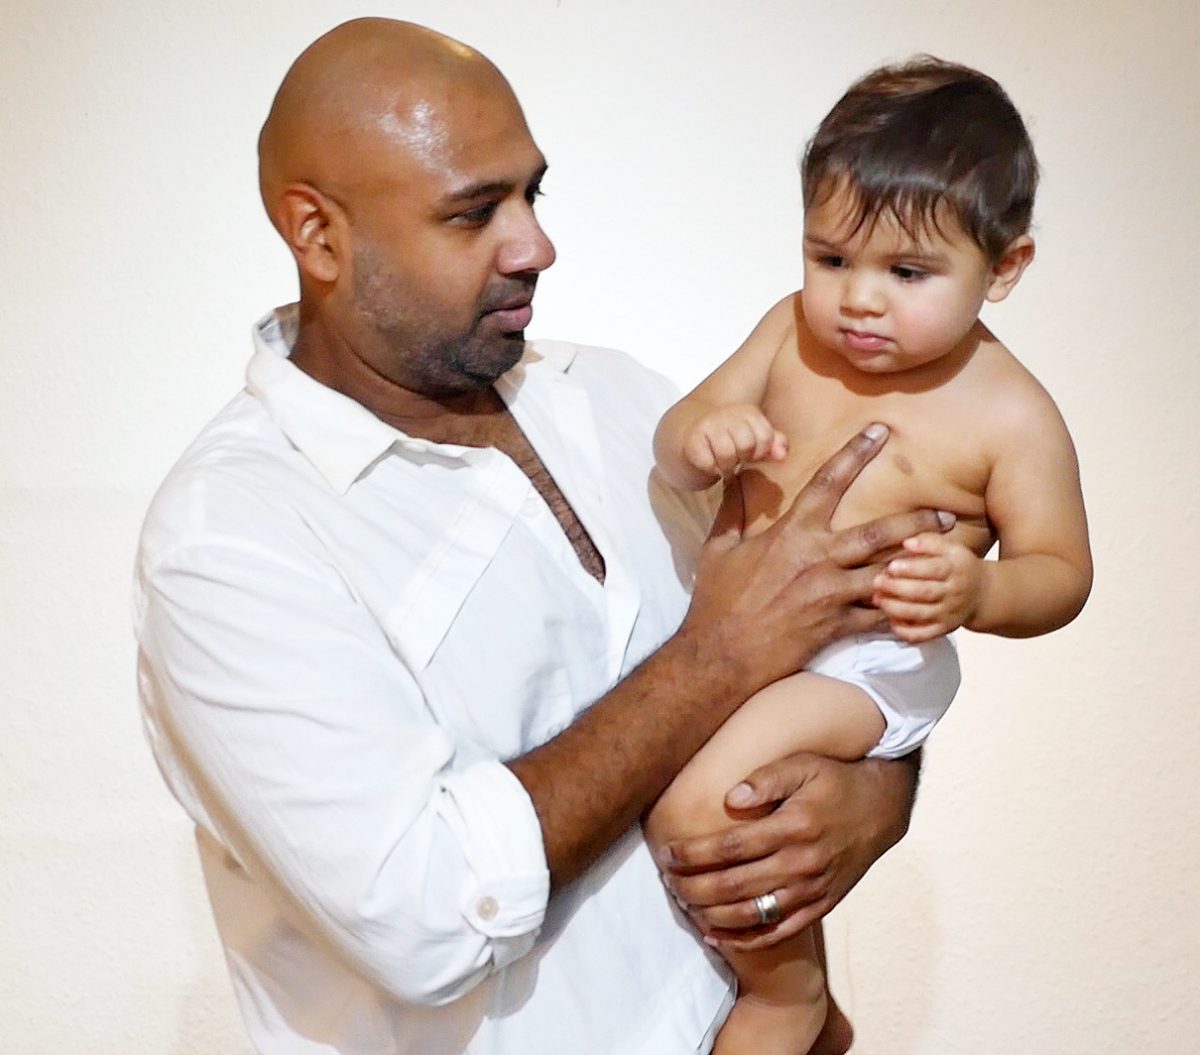 A South Asian man in a white shirt holds his young son in his arms